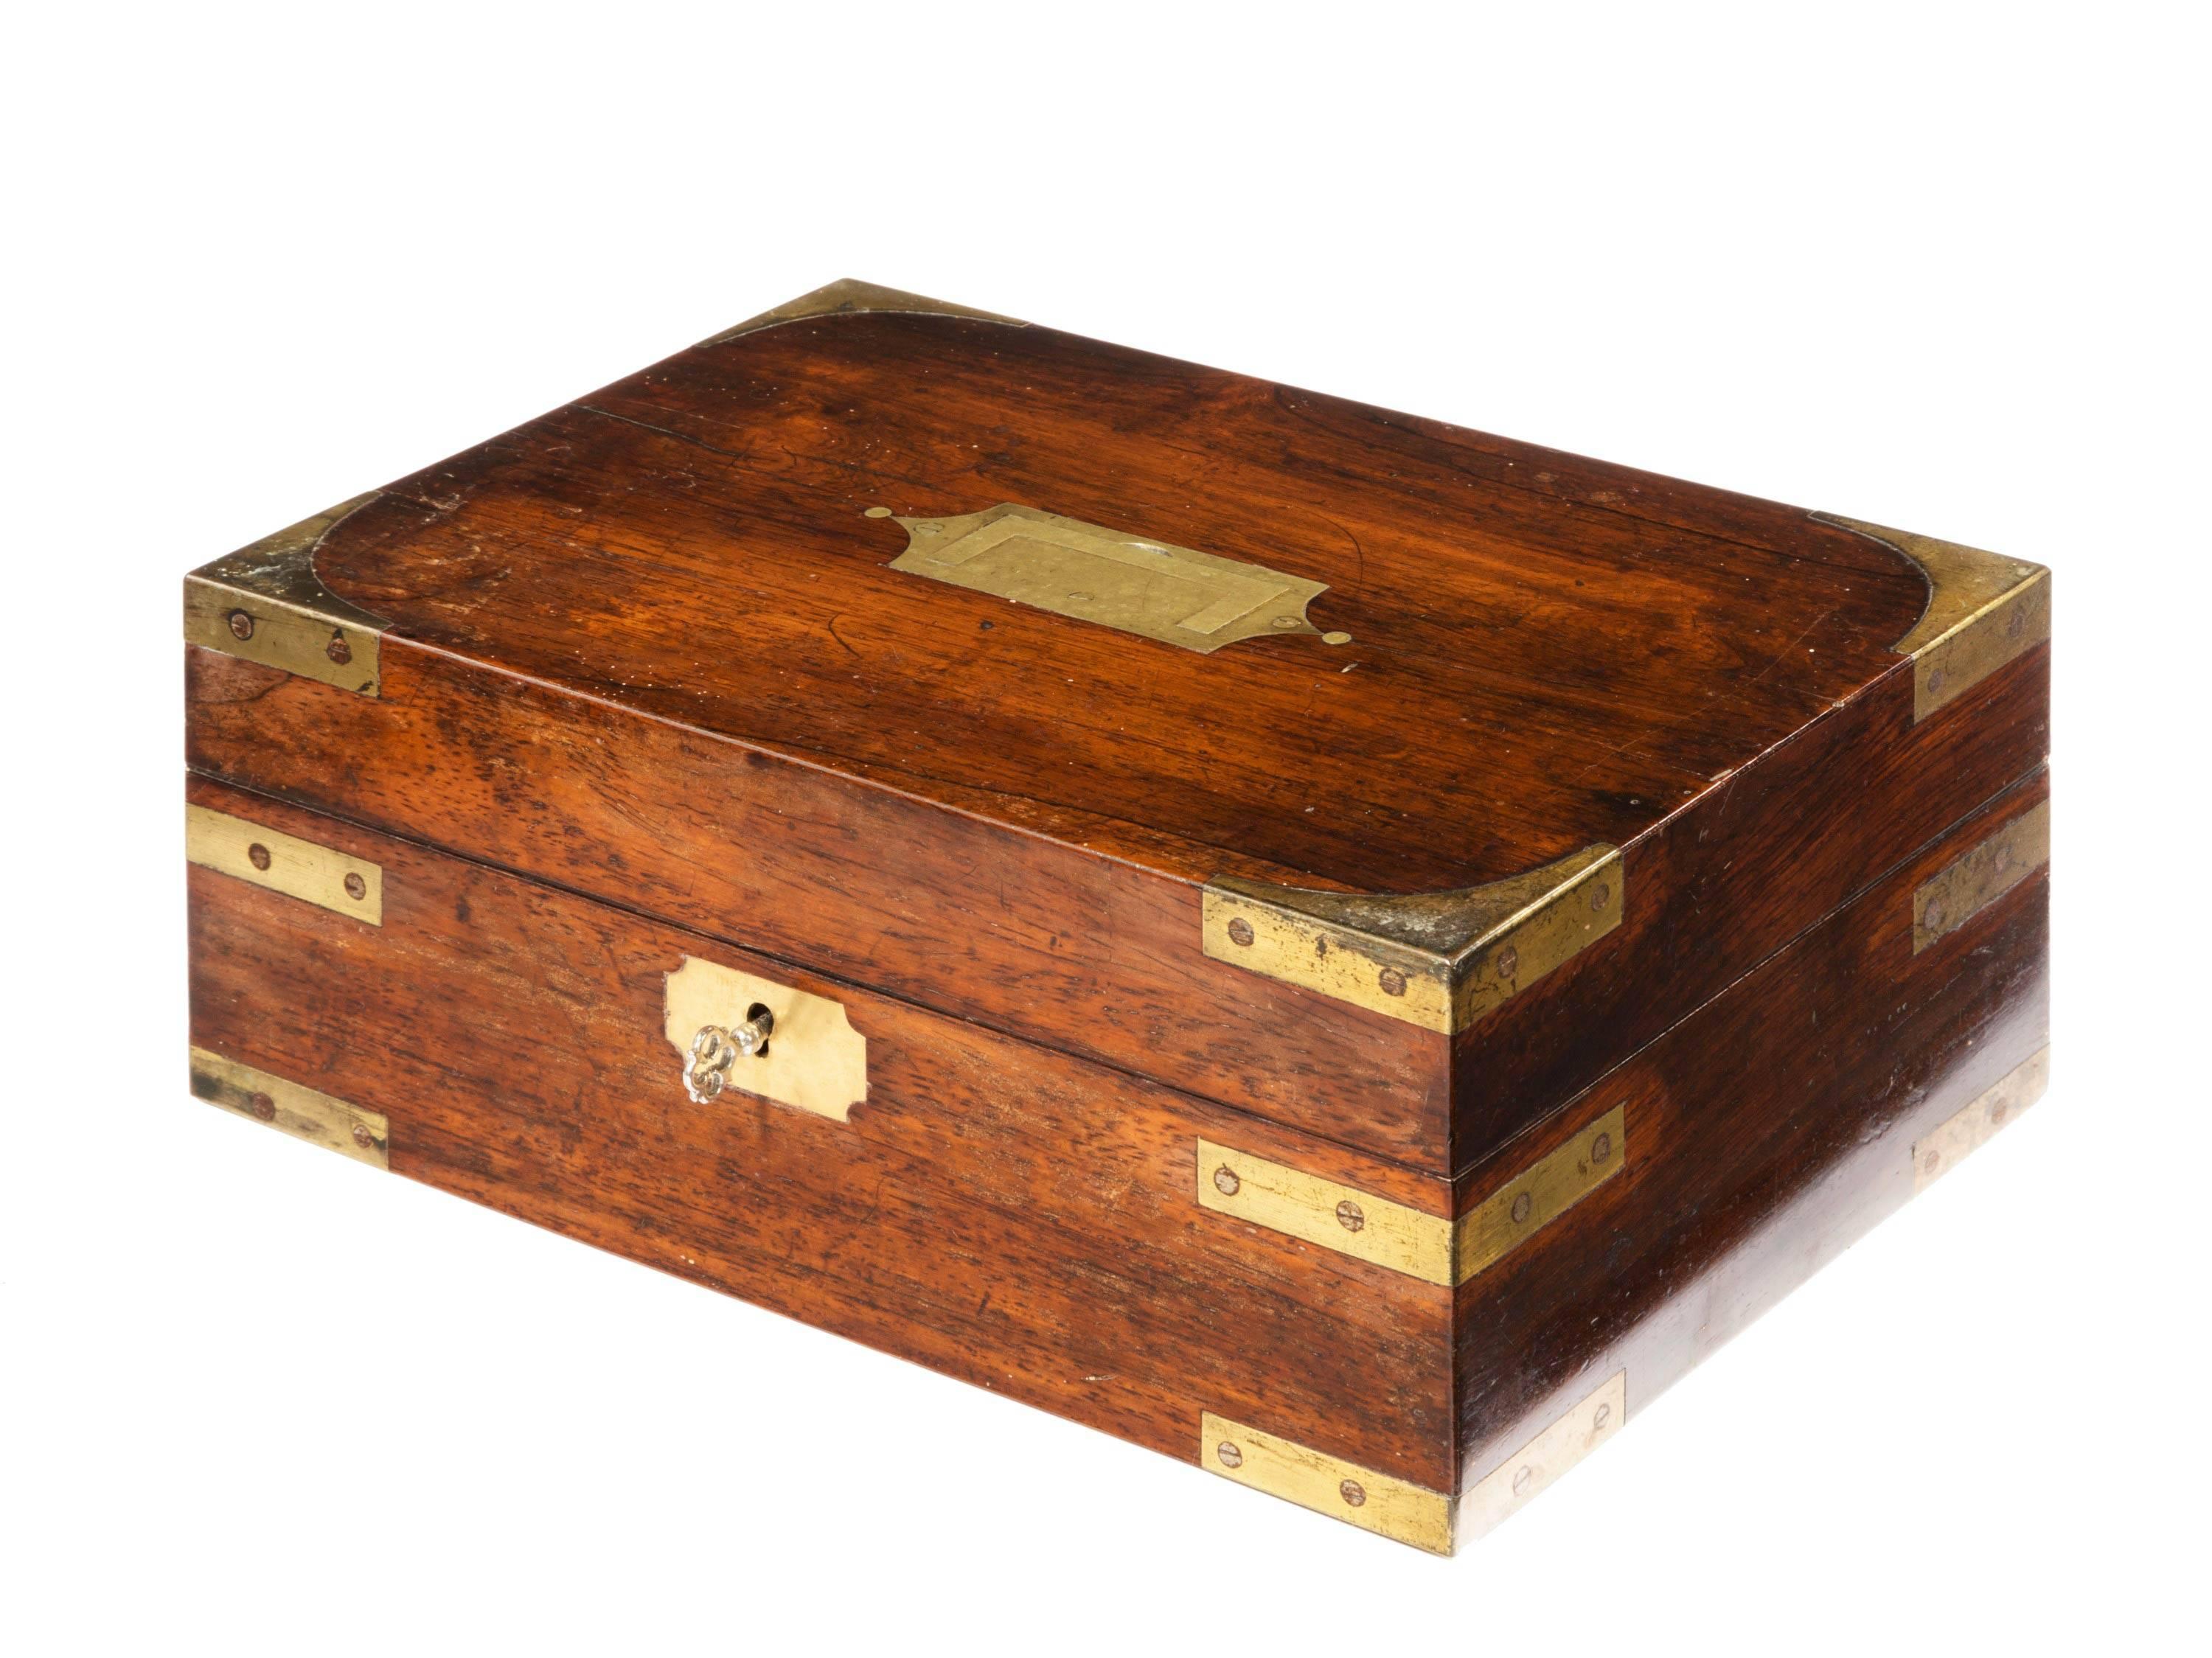 A good brass-mounted mahogany travelling box. Retaining all original inset brass corners and panels. The interior fitted with small well gilded writing section. With a pen section and boxes.